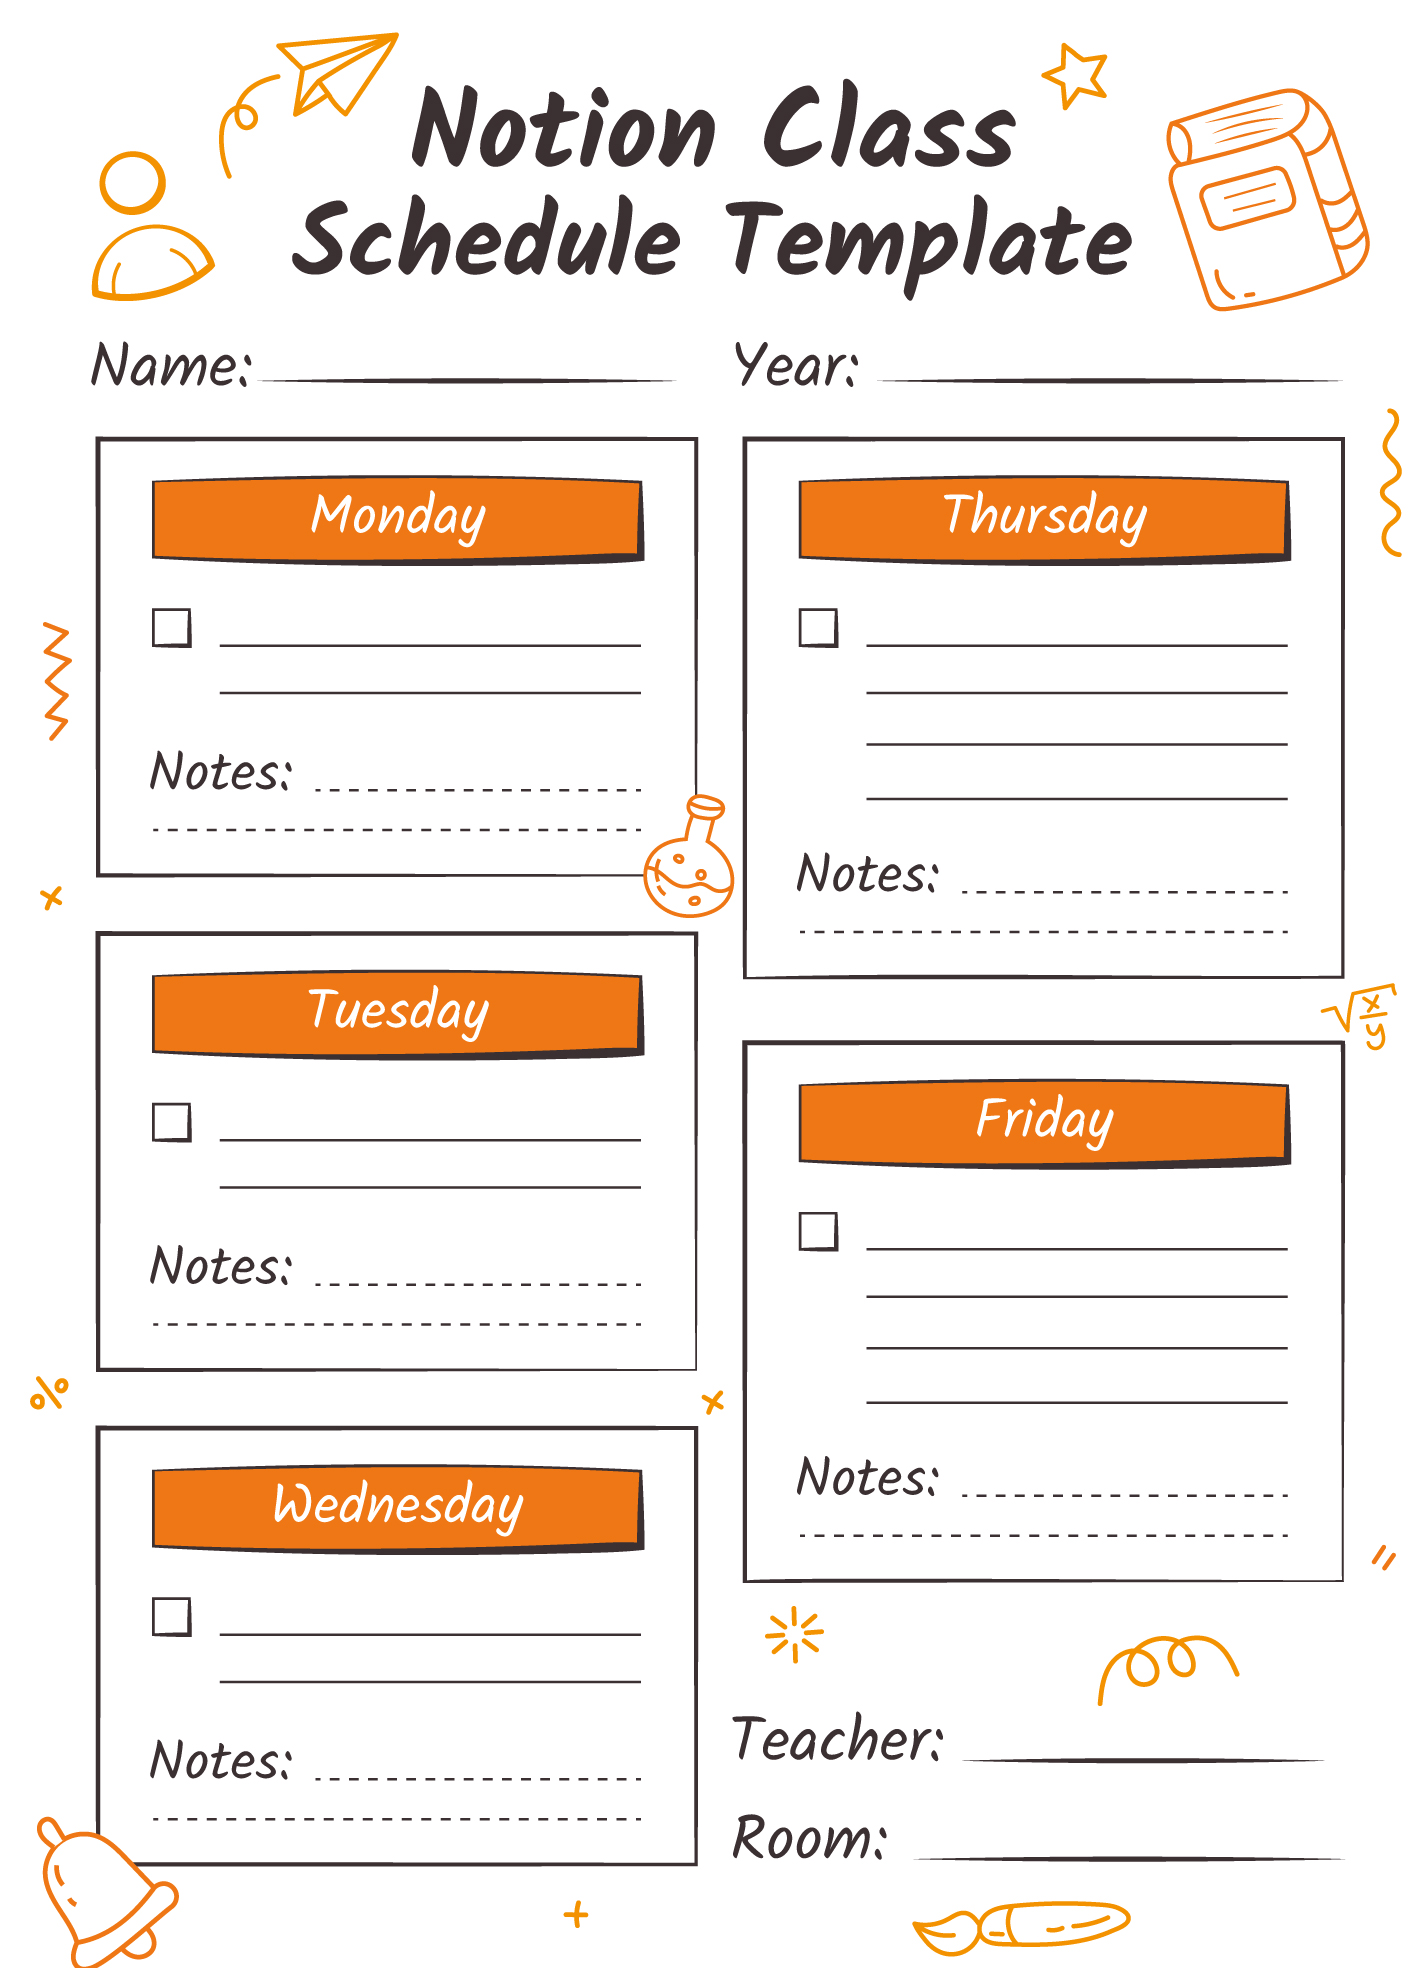 weekly schedule template notion